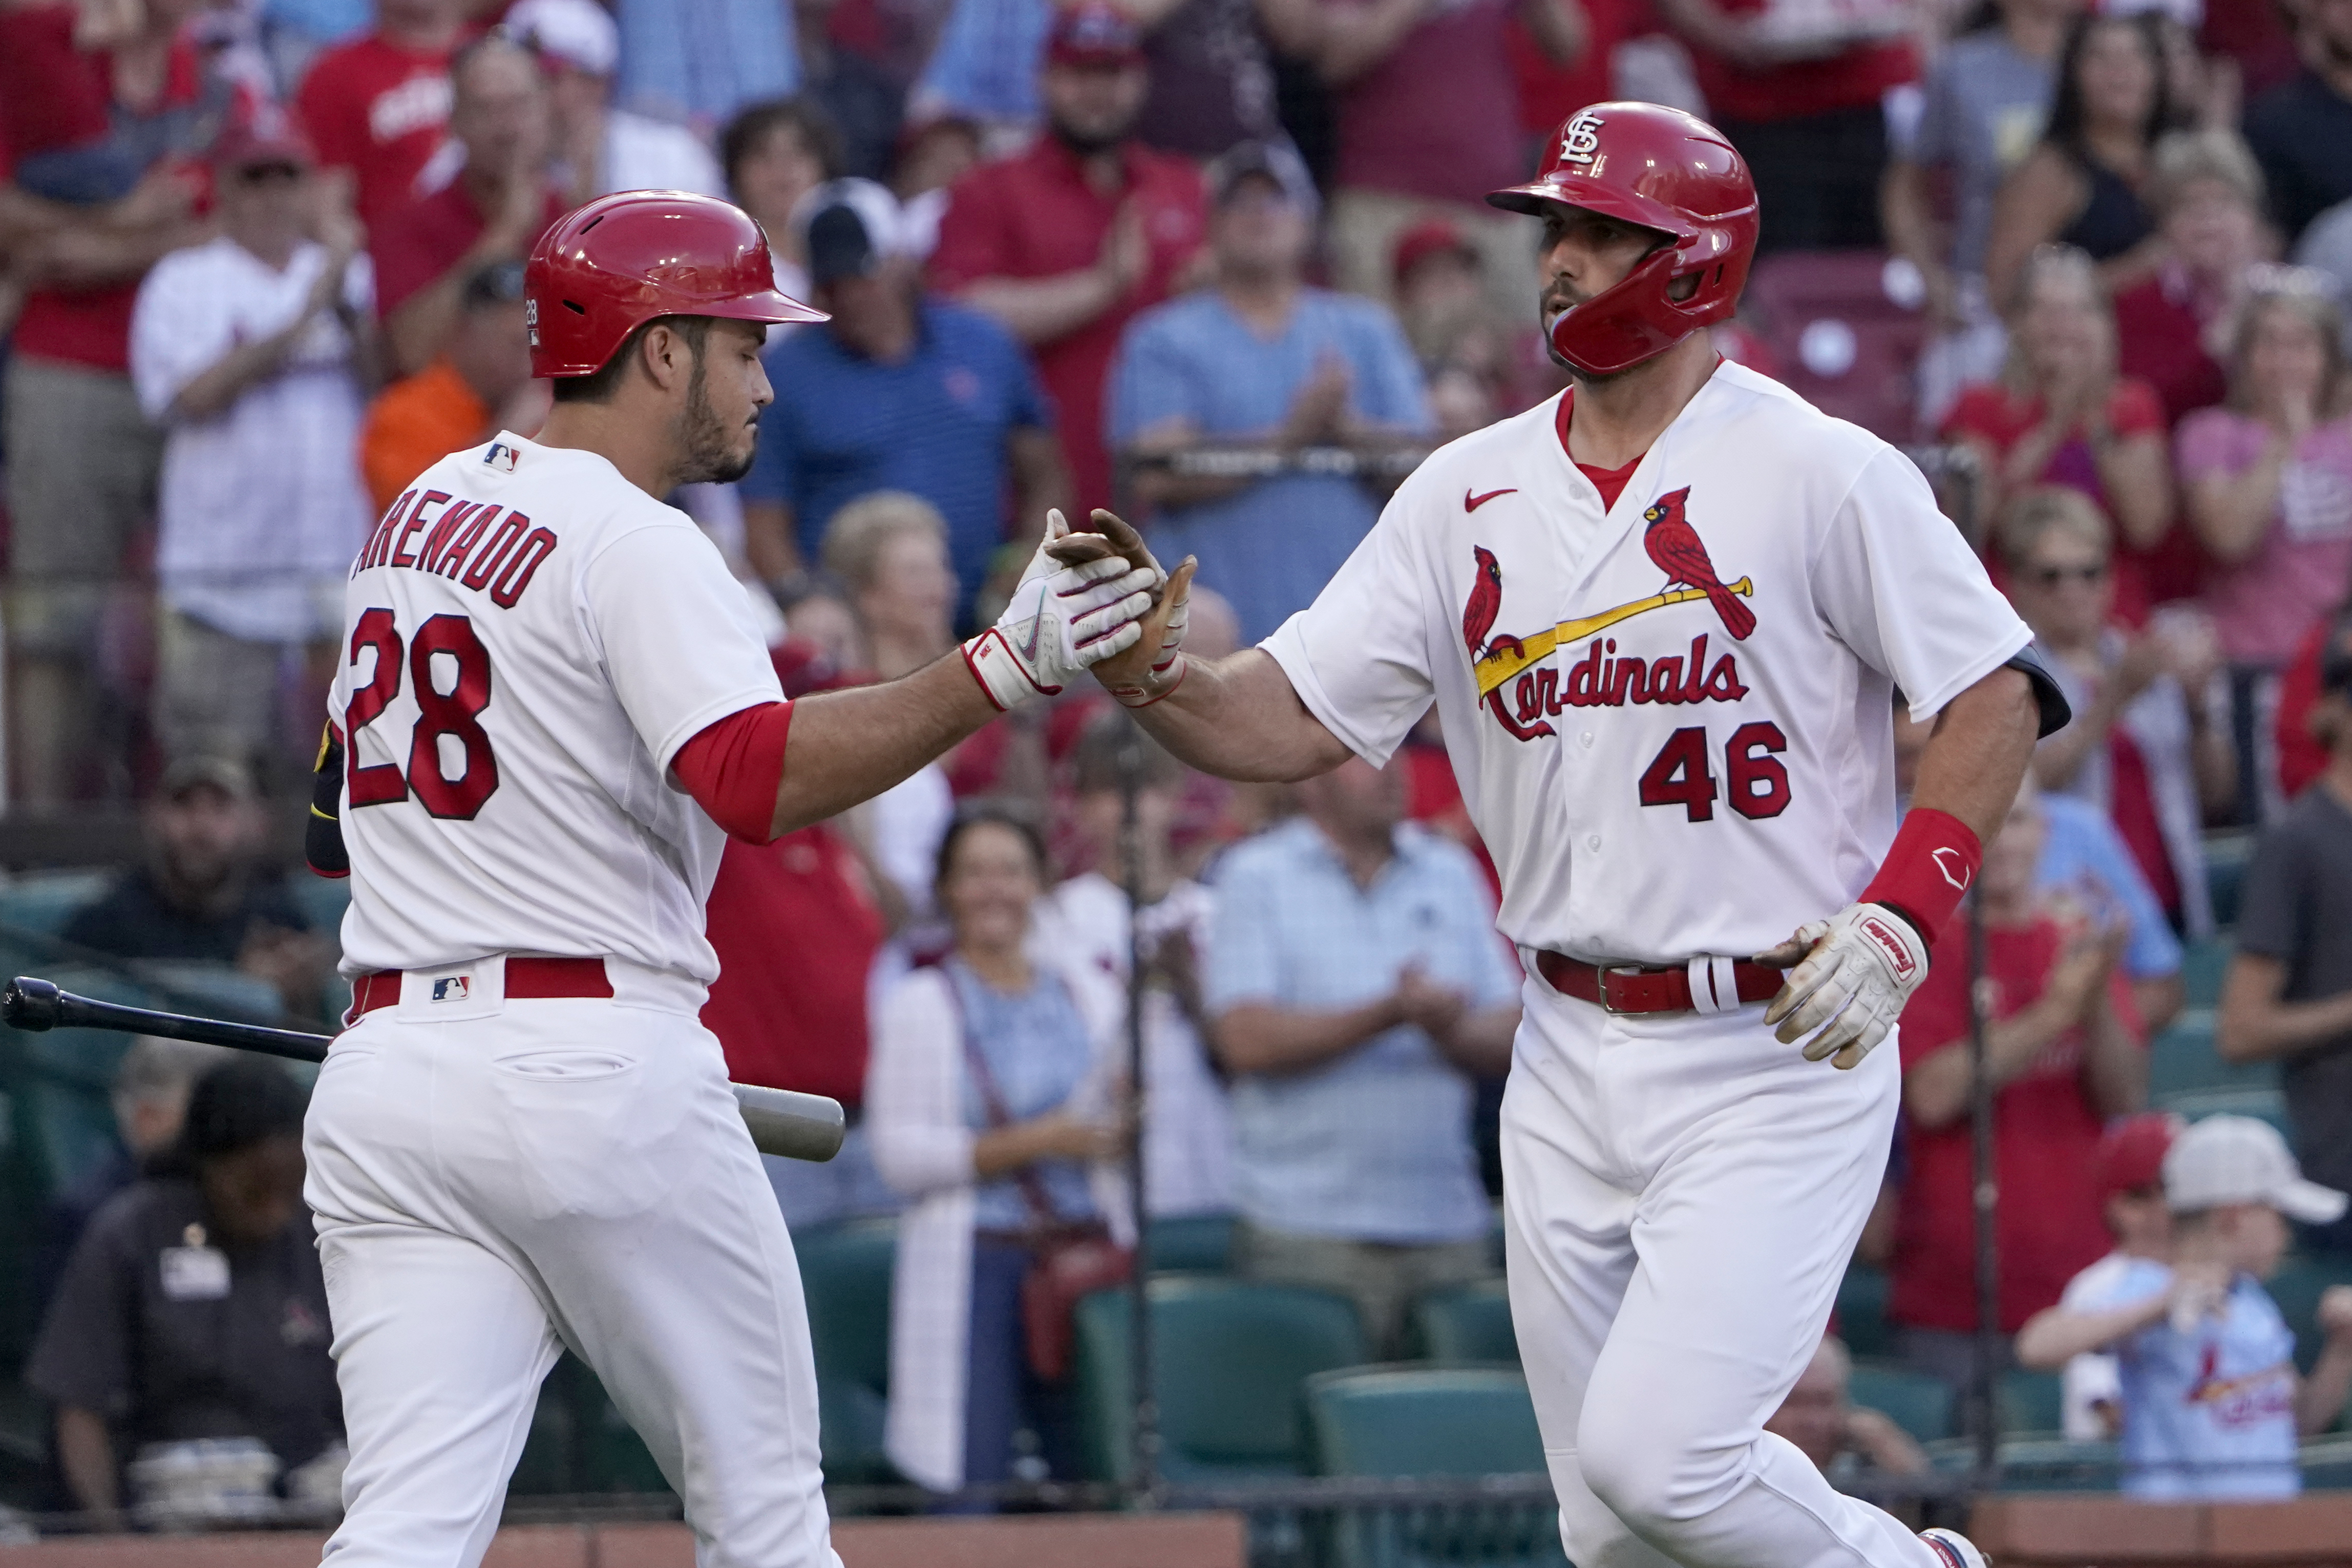 Waino, Goldy and Arenado to play for Team USA in World Baseball Classic